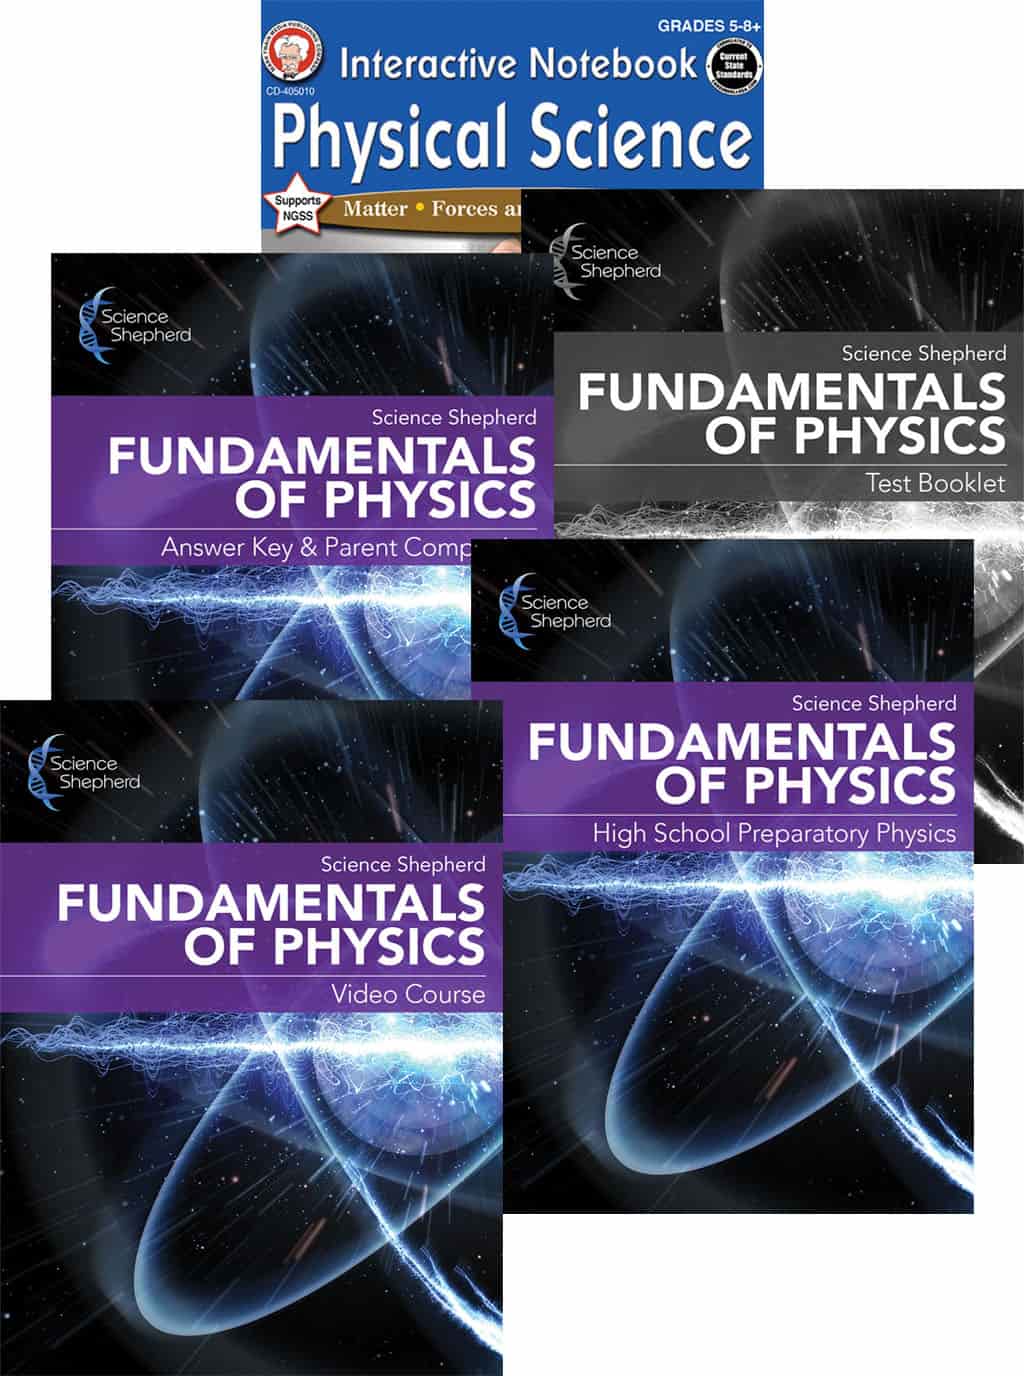 Fundamentals of Physics homeschool videos with 3-book set and lab book cover